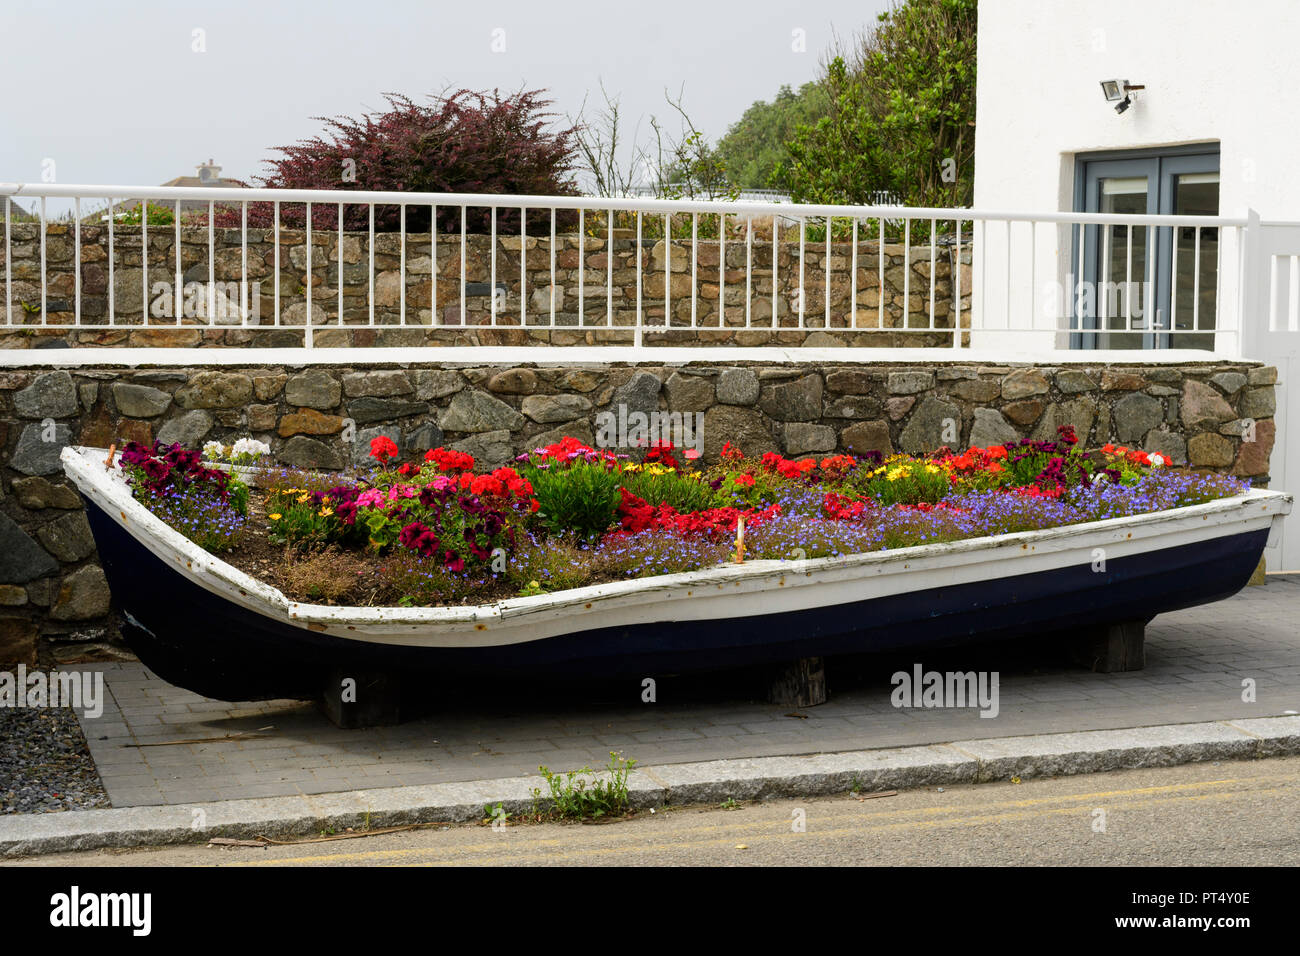 Rowing boat wreck filled with flowers in Kilmore Quay, Co. Wexford, Ireland Stock Photo